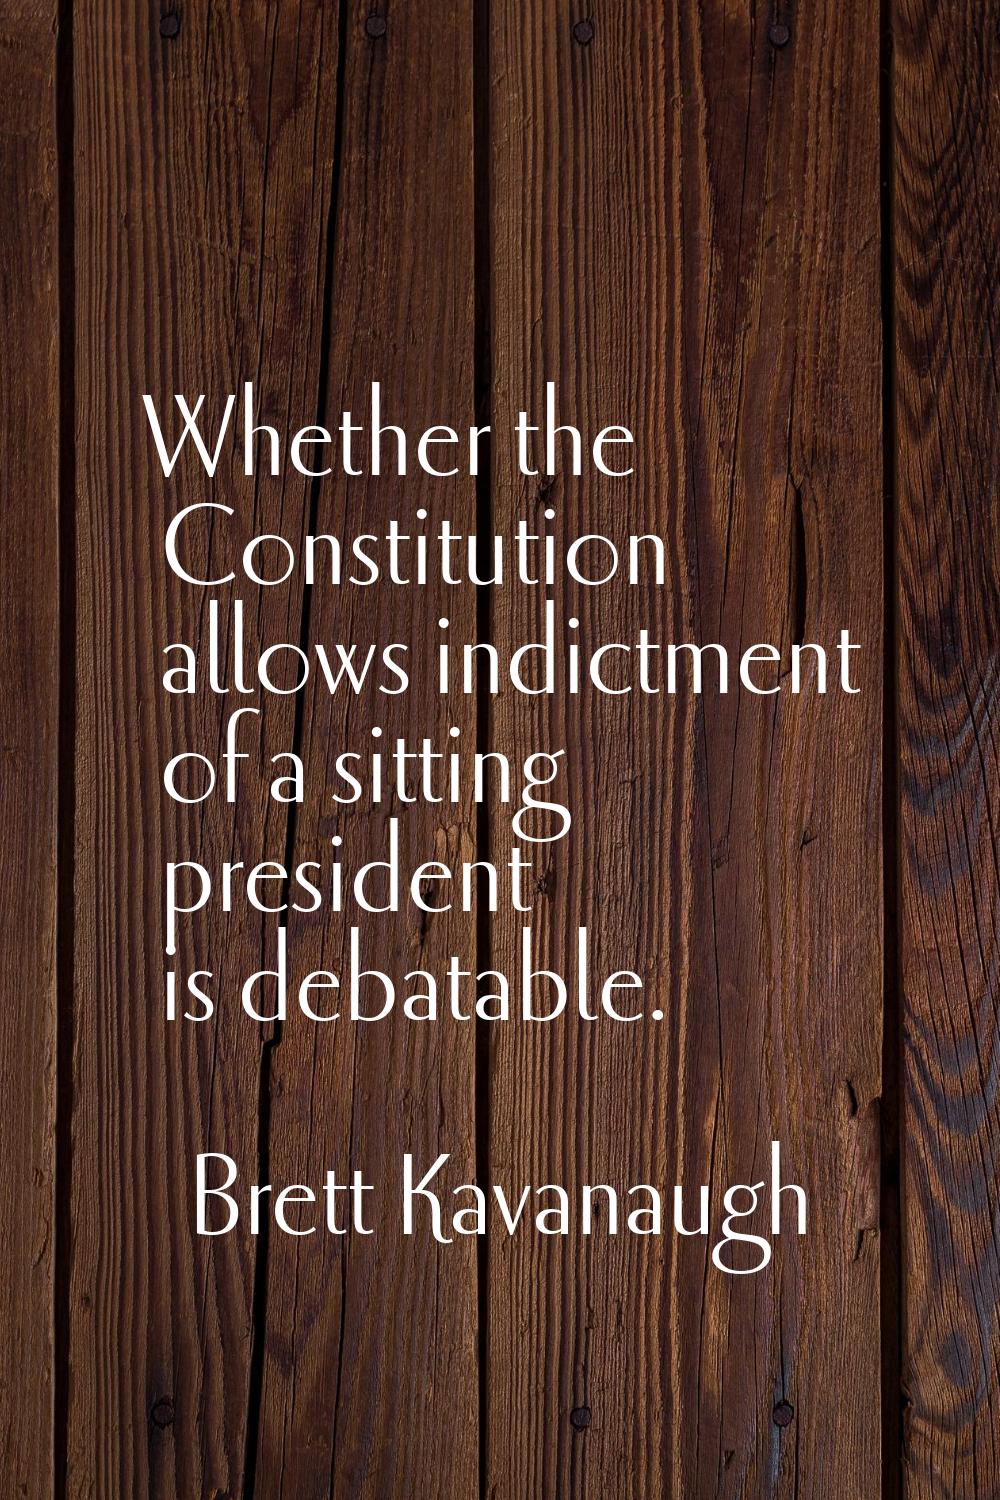 Whether the Constitution allows indictment of a sitting president is debatable.